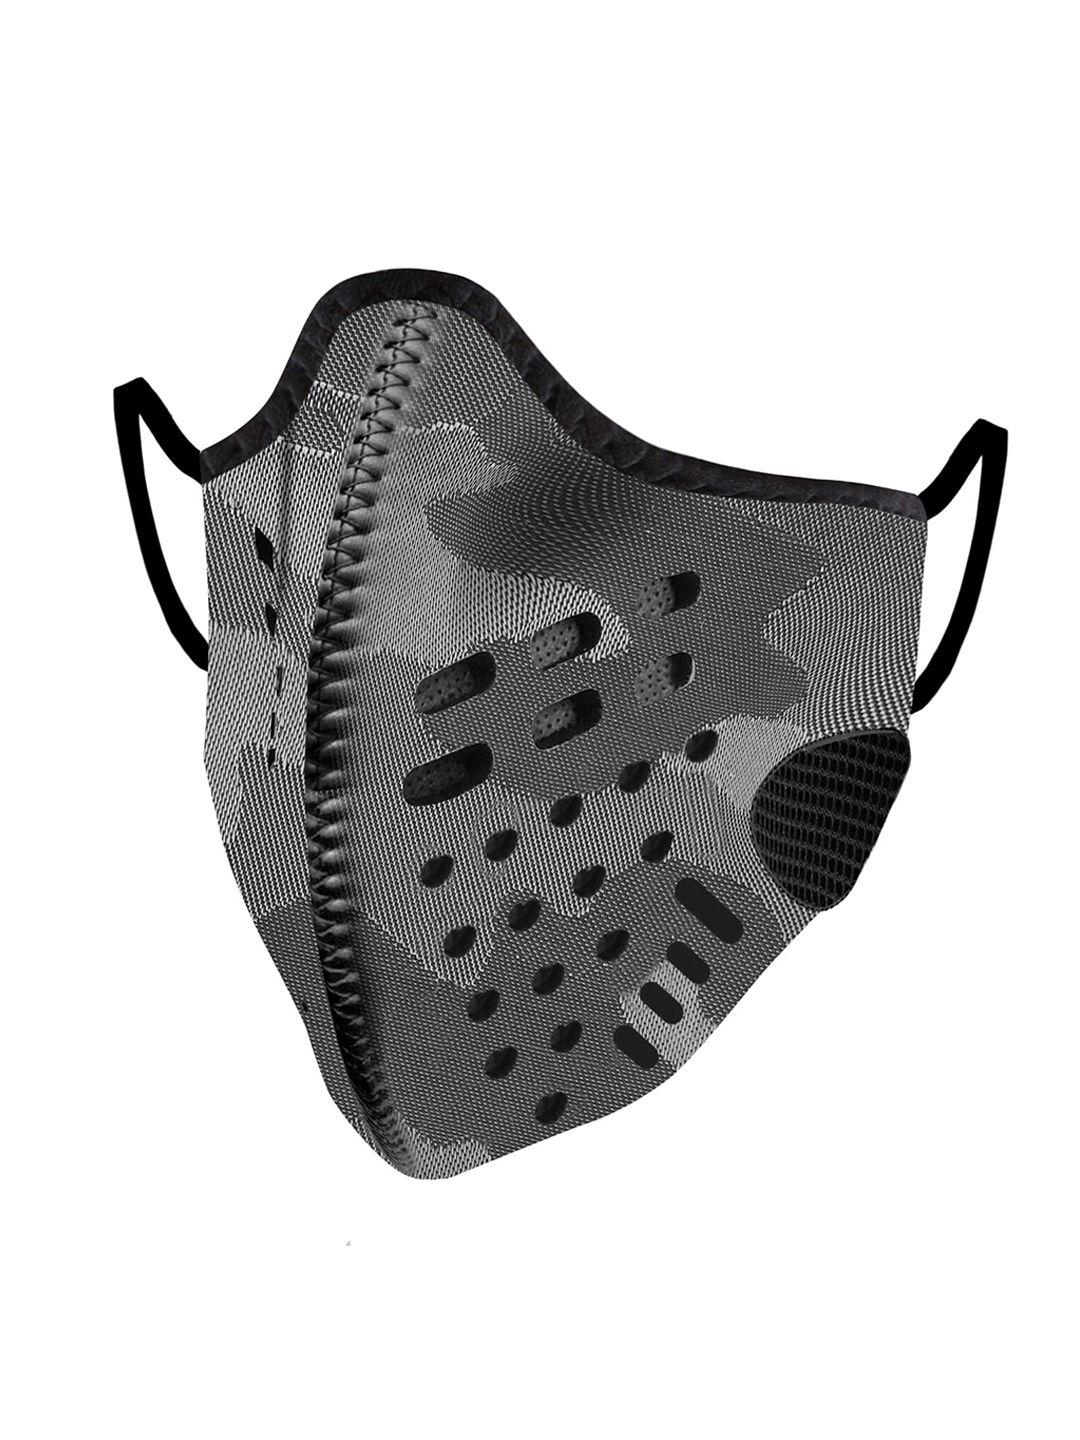 lioncrown charcoal grey & black camouflage printed 6-ply cloth mask